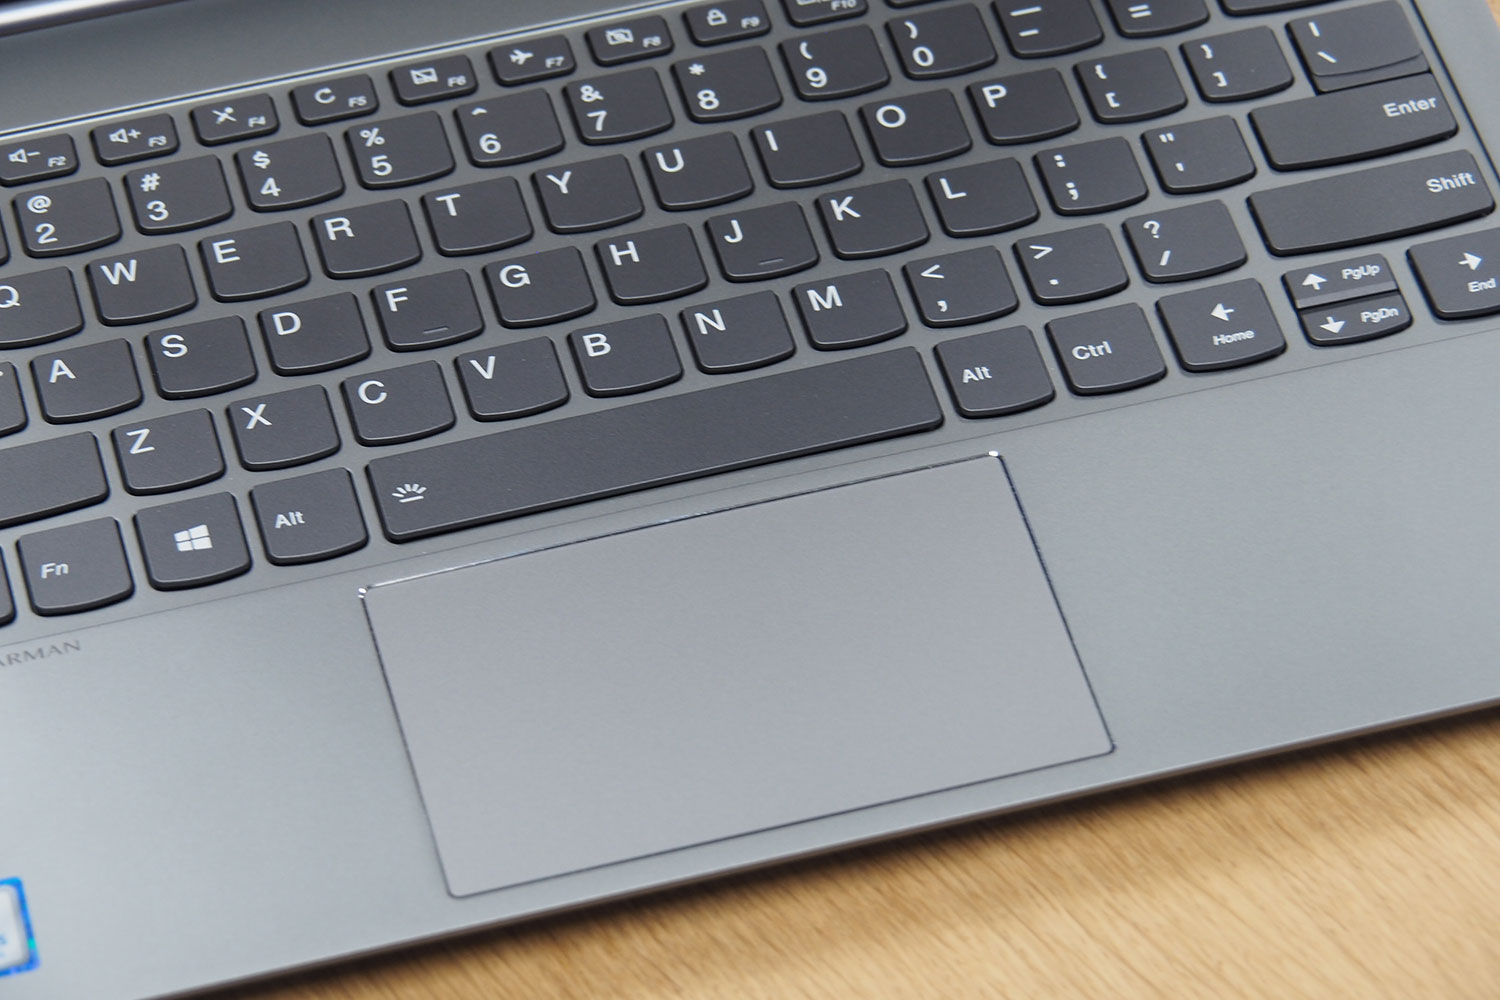 Lenovo ThinkBook 13s Review: Where's the Business? | Digital Trends